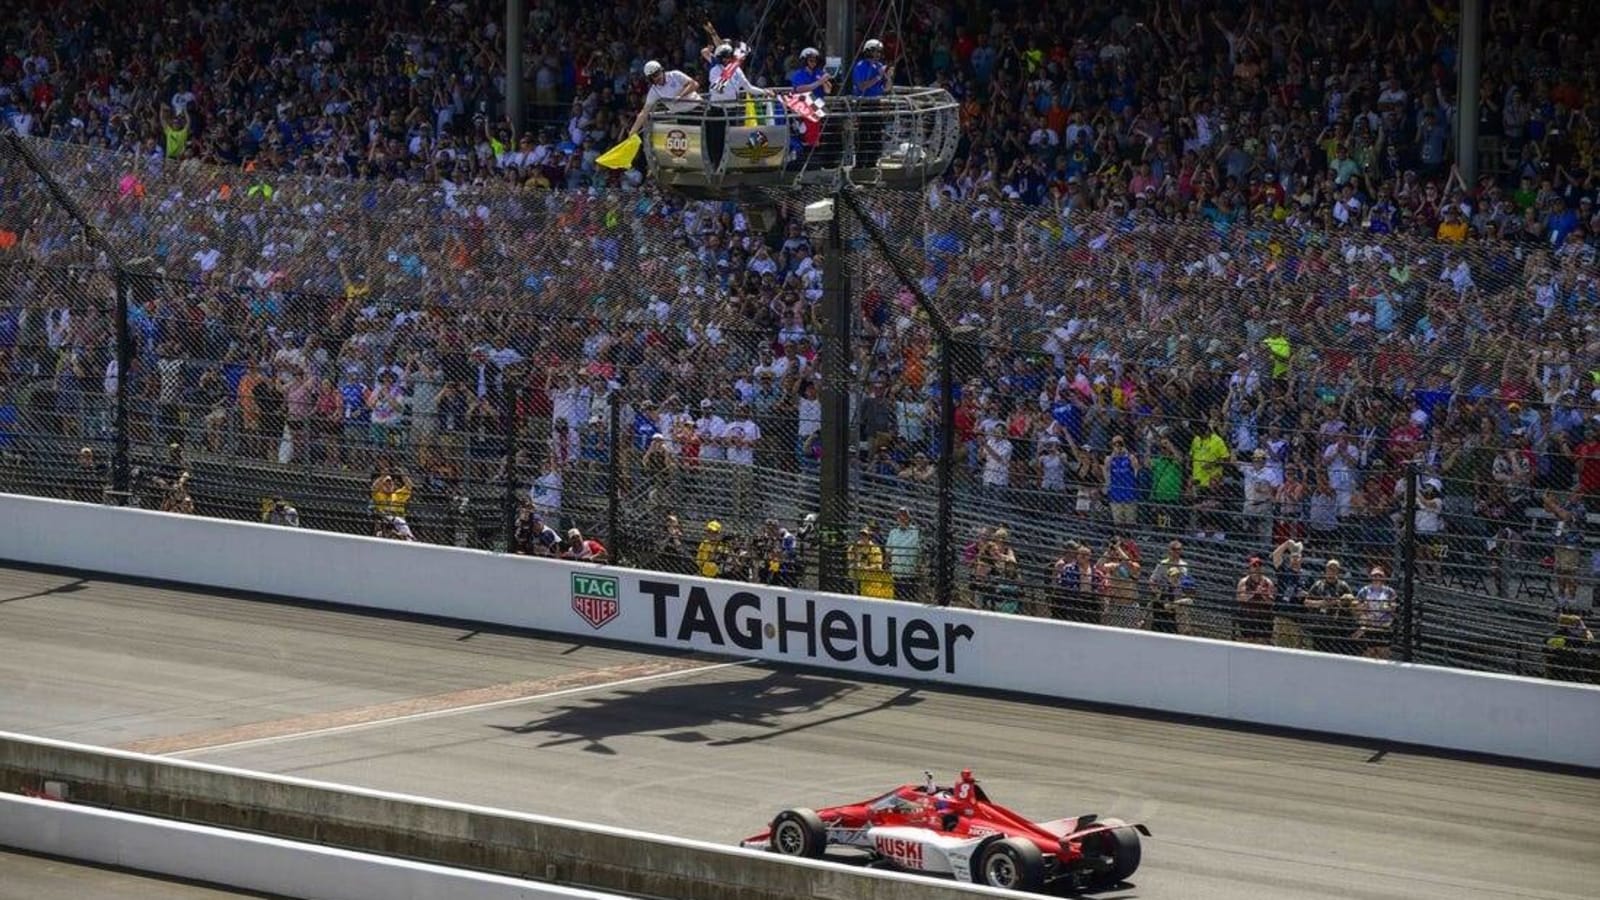 Marcus Ericsson thrives in restart to win Indianapolis 500